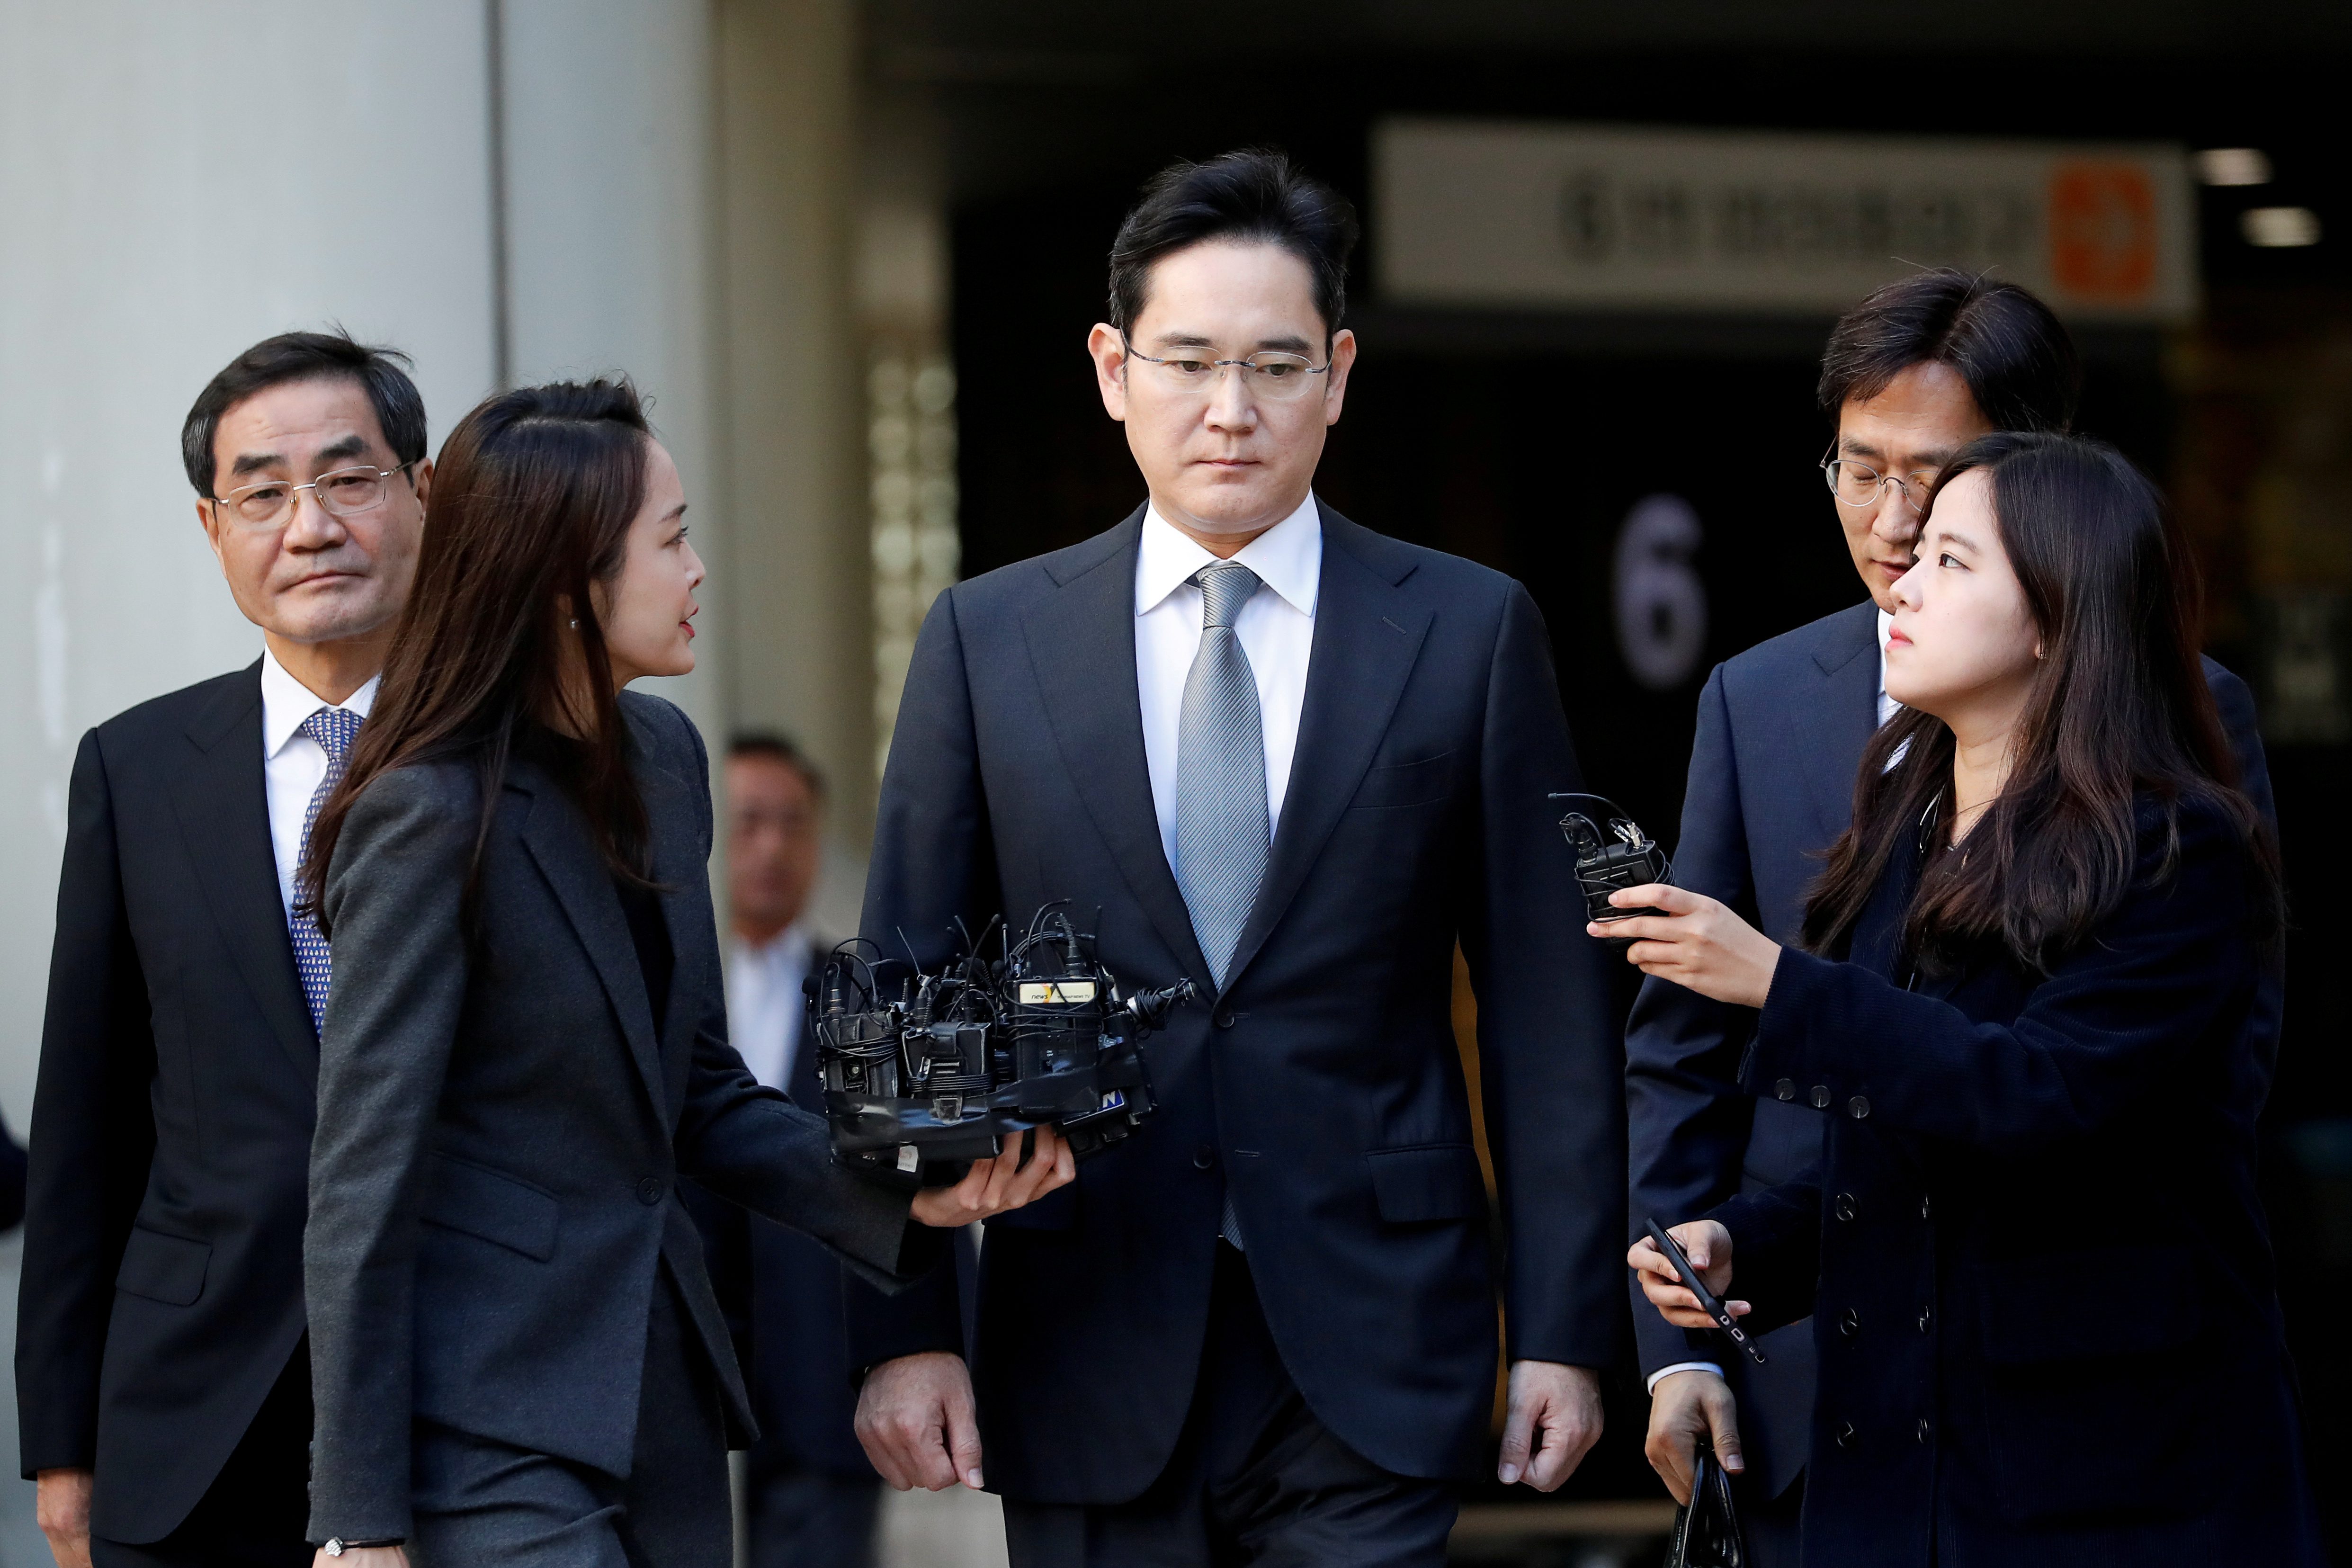 Samsung’s Lee receives 30-month prison term in bribery trial